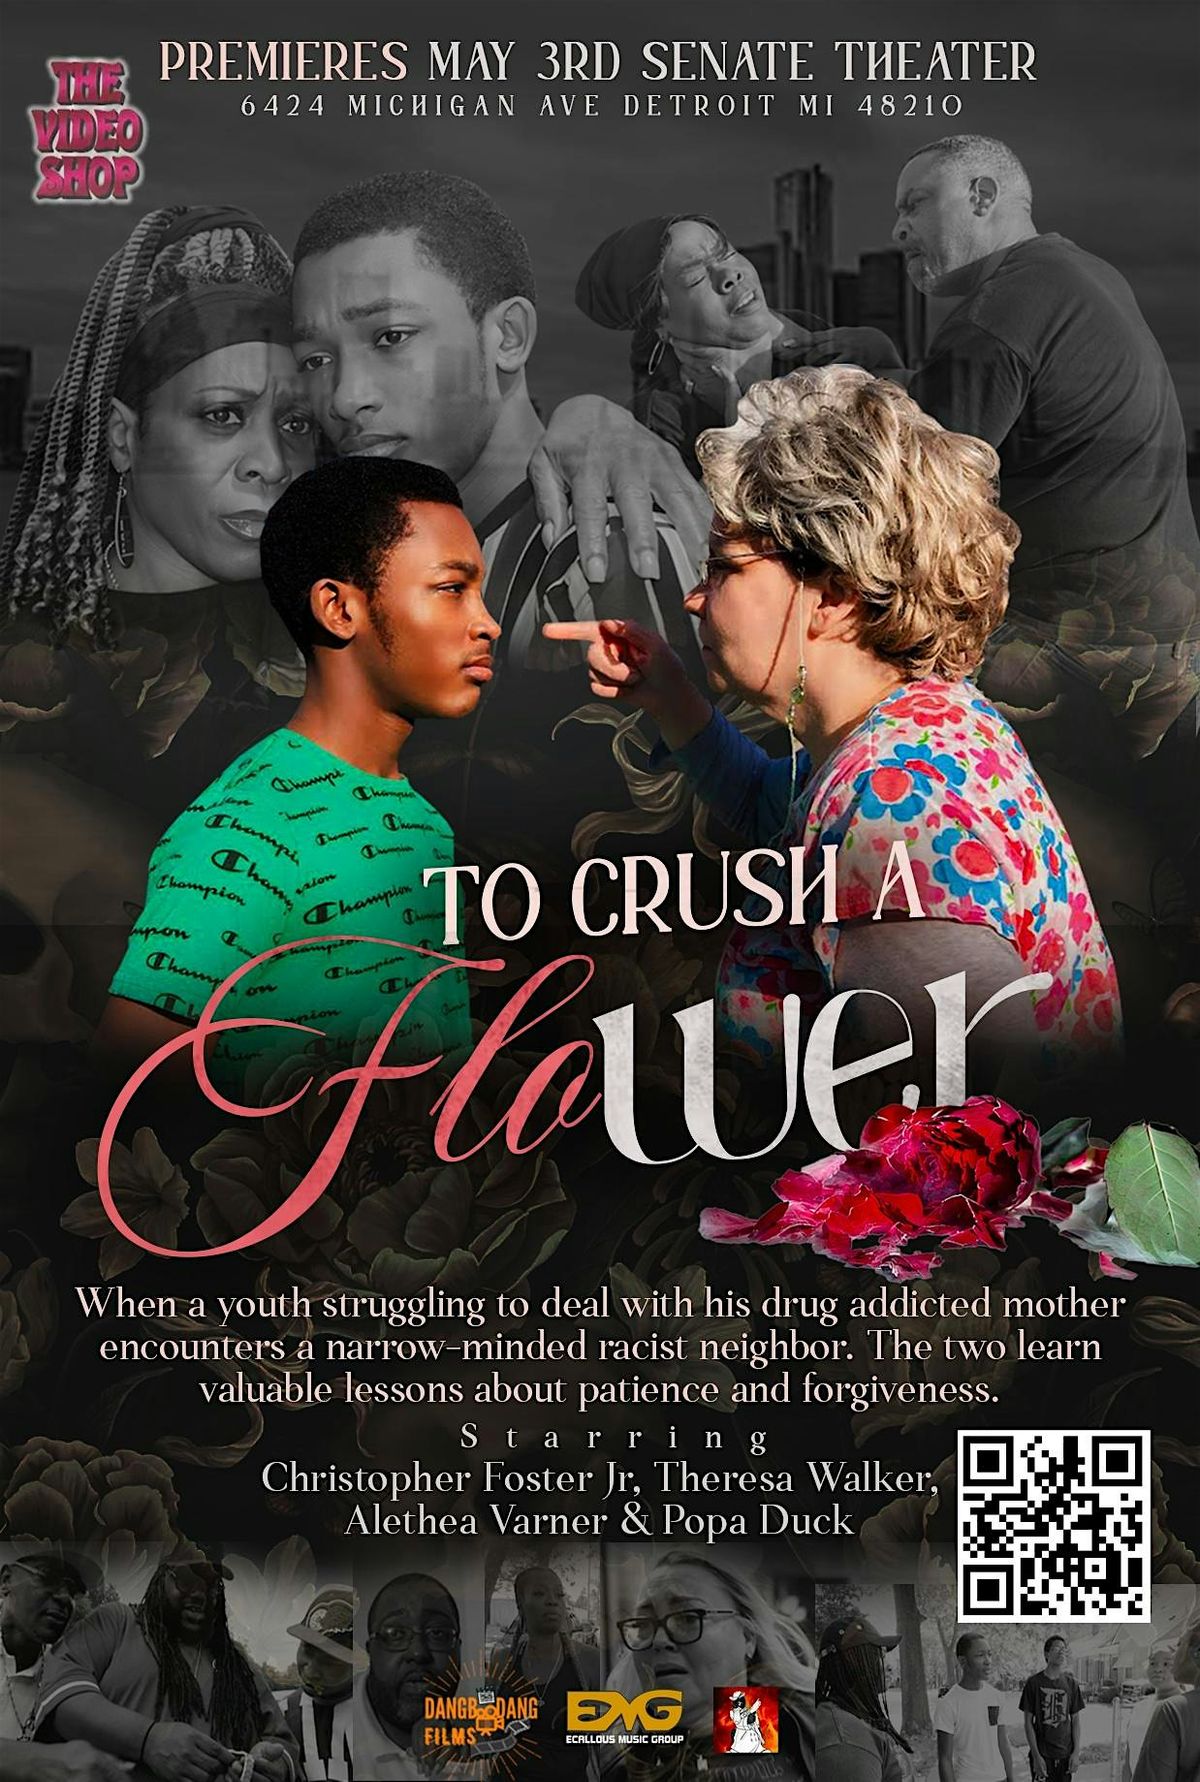 "TO CRUSH A FLOWER" MOVIE PREMIERE